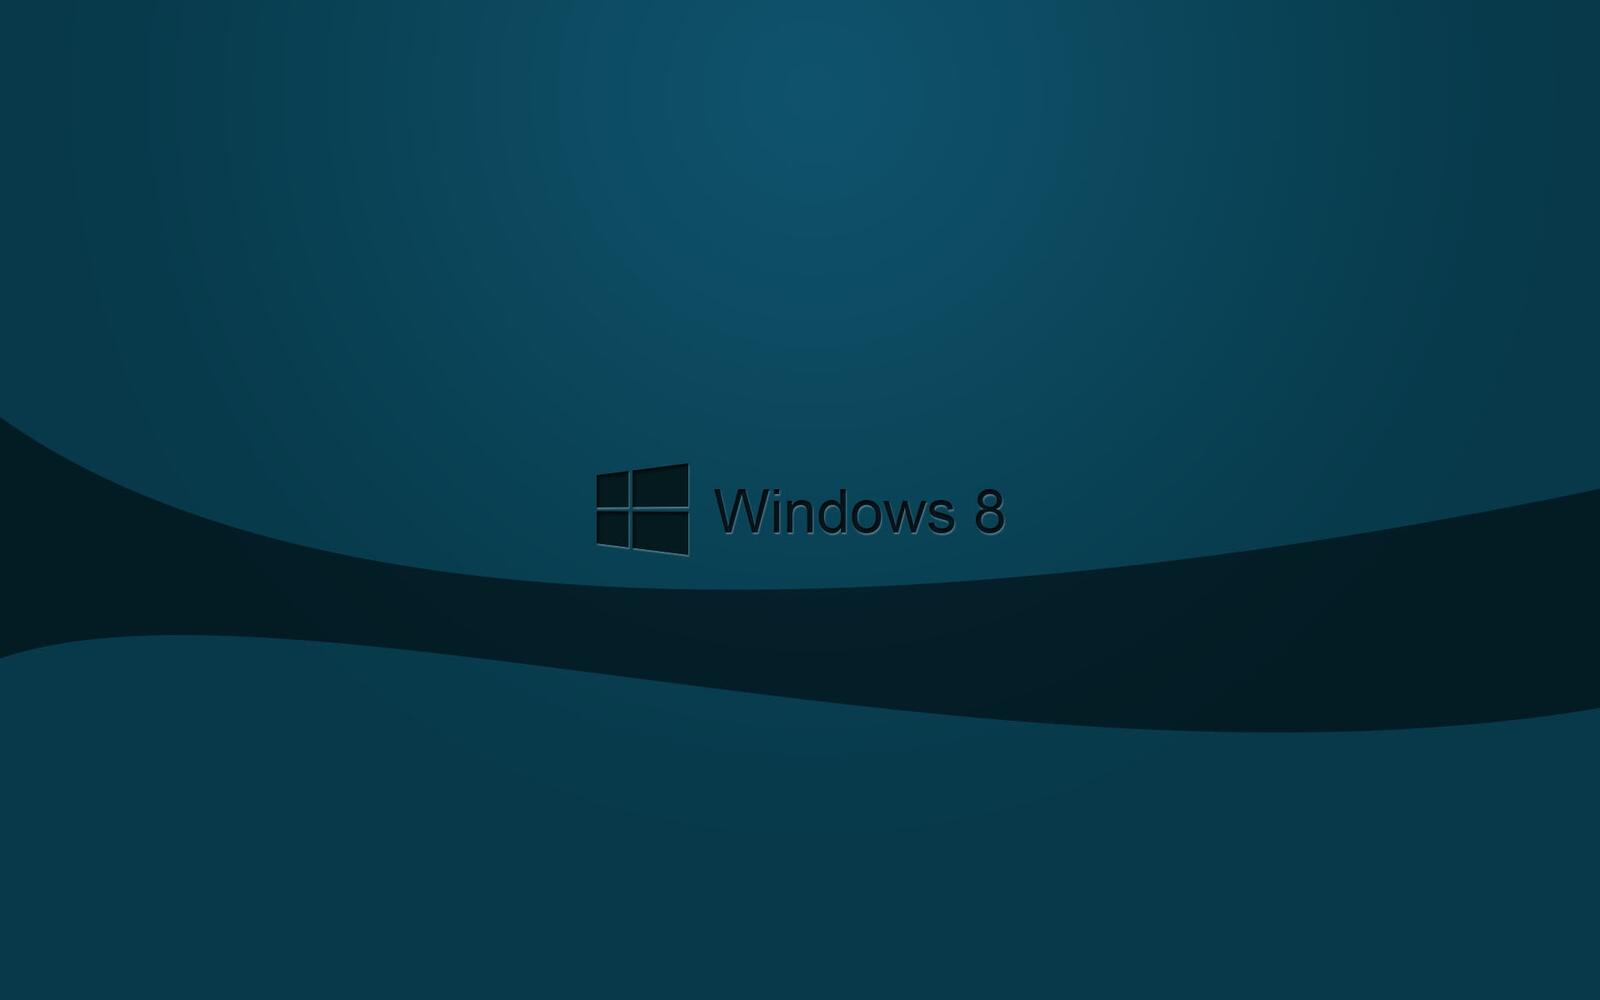 Wallpapers screensaver windows 8 operating system on the desktop